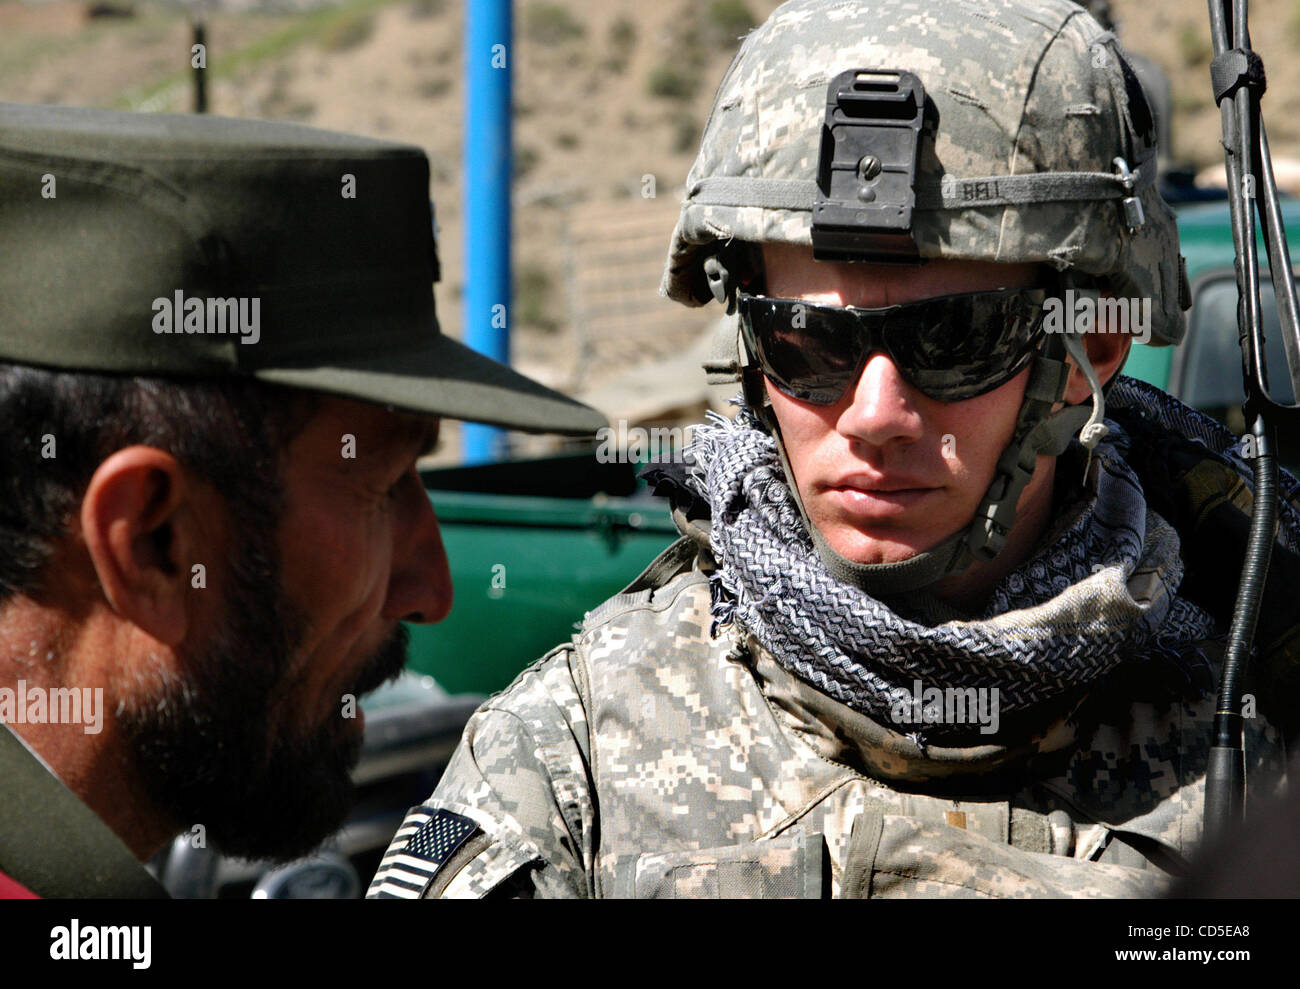 Apr 29, 2008 - Paktya Province, Afghanistan - LIEUTENANT KEVIN BELL of the 1-61 Cavalry, 4th Brigade Combat Team, 101st Airborne, discusses security concerns with the new district Afghan National Civil Order Police (ANCOP) commander on patrol in eastern Afghanistan. Bell, a 2006 graduate of Davidson Stock Photo